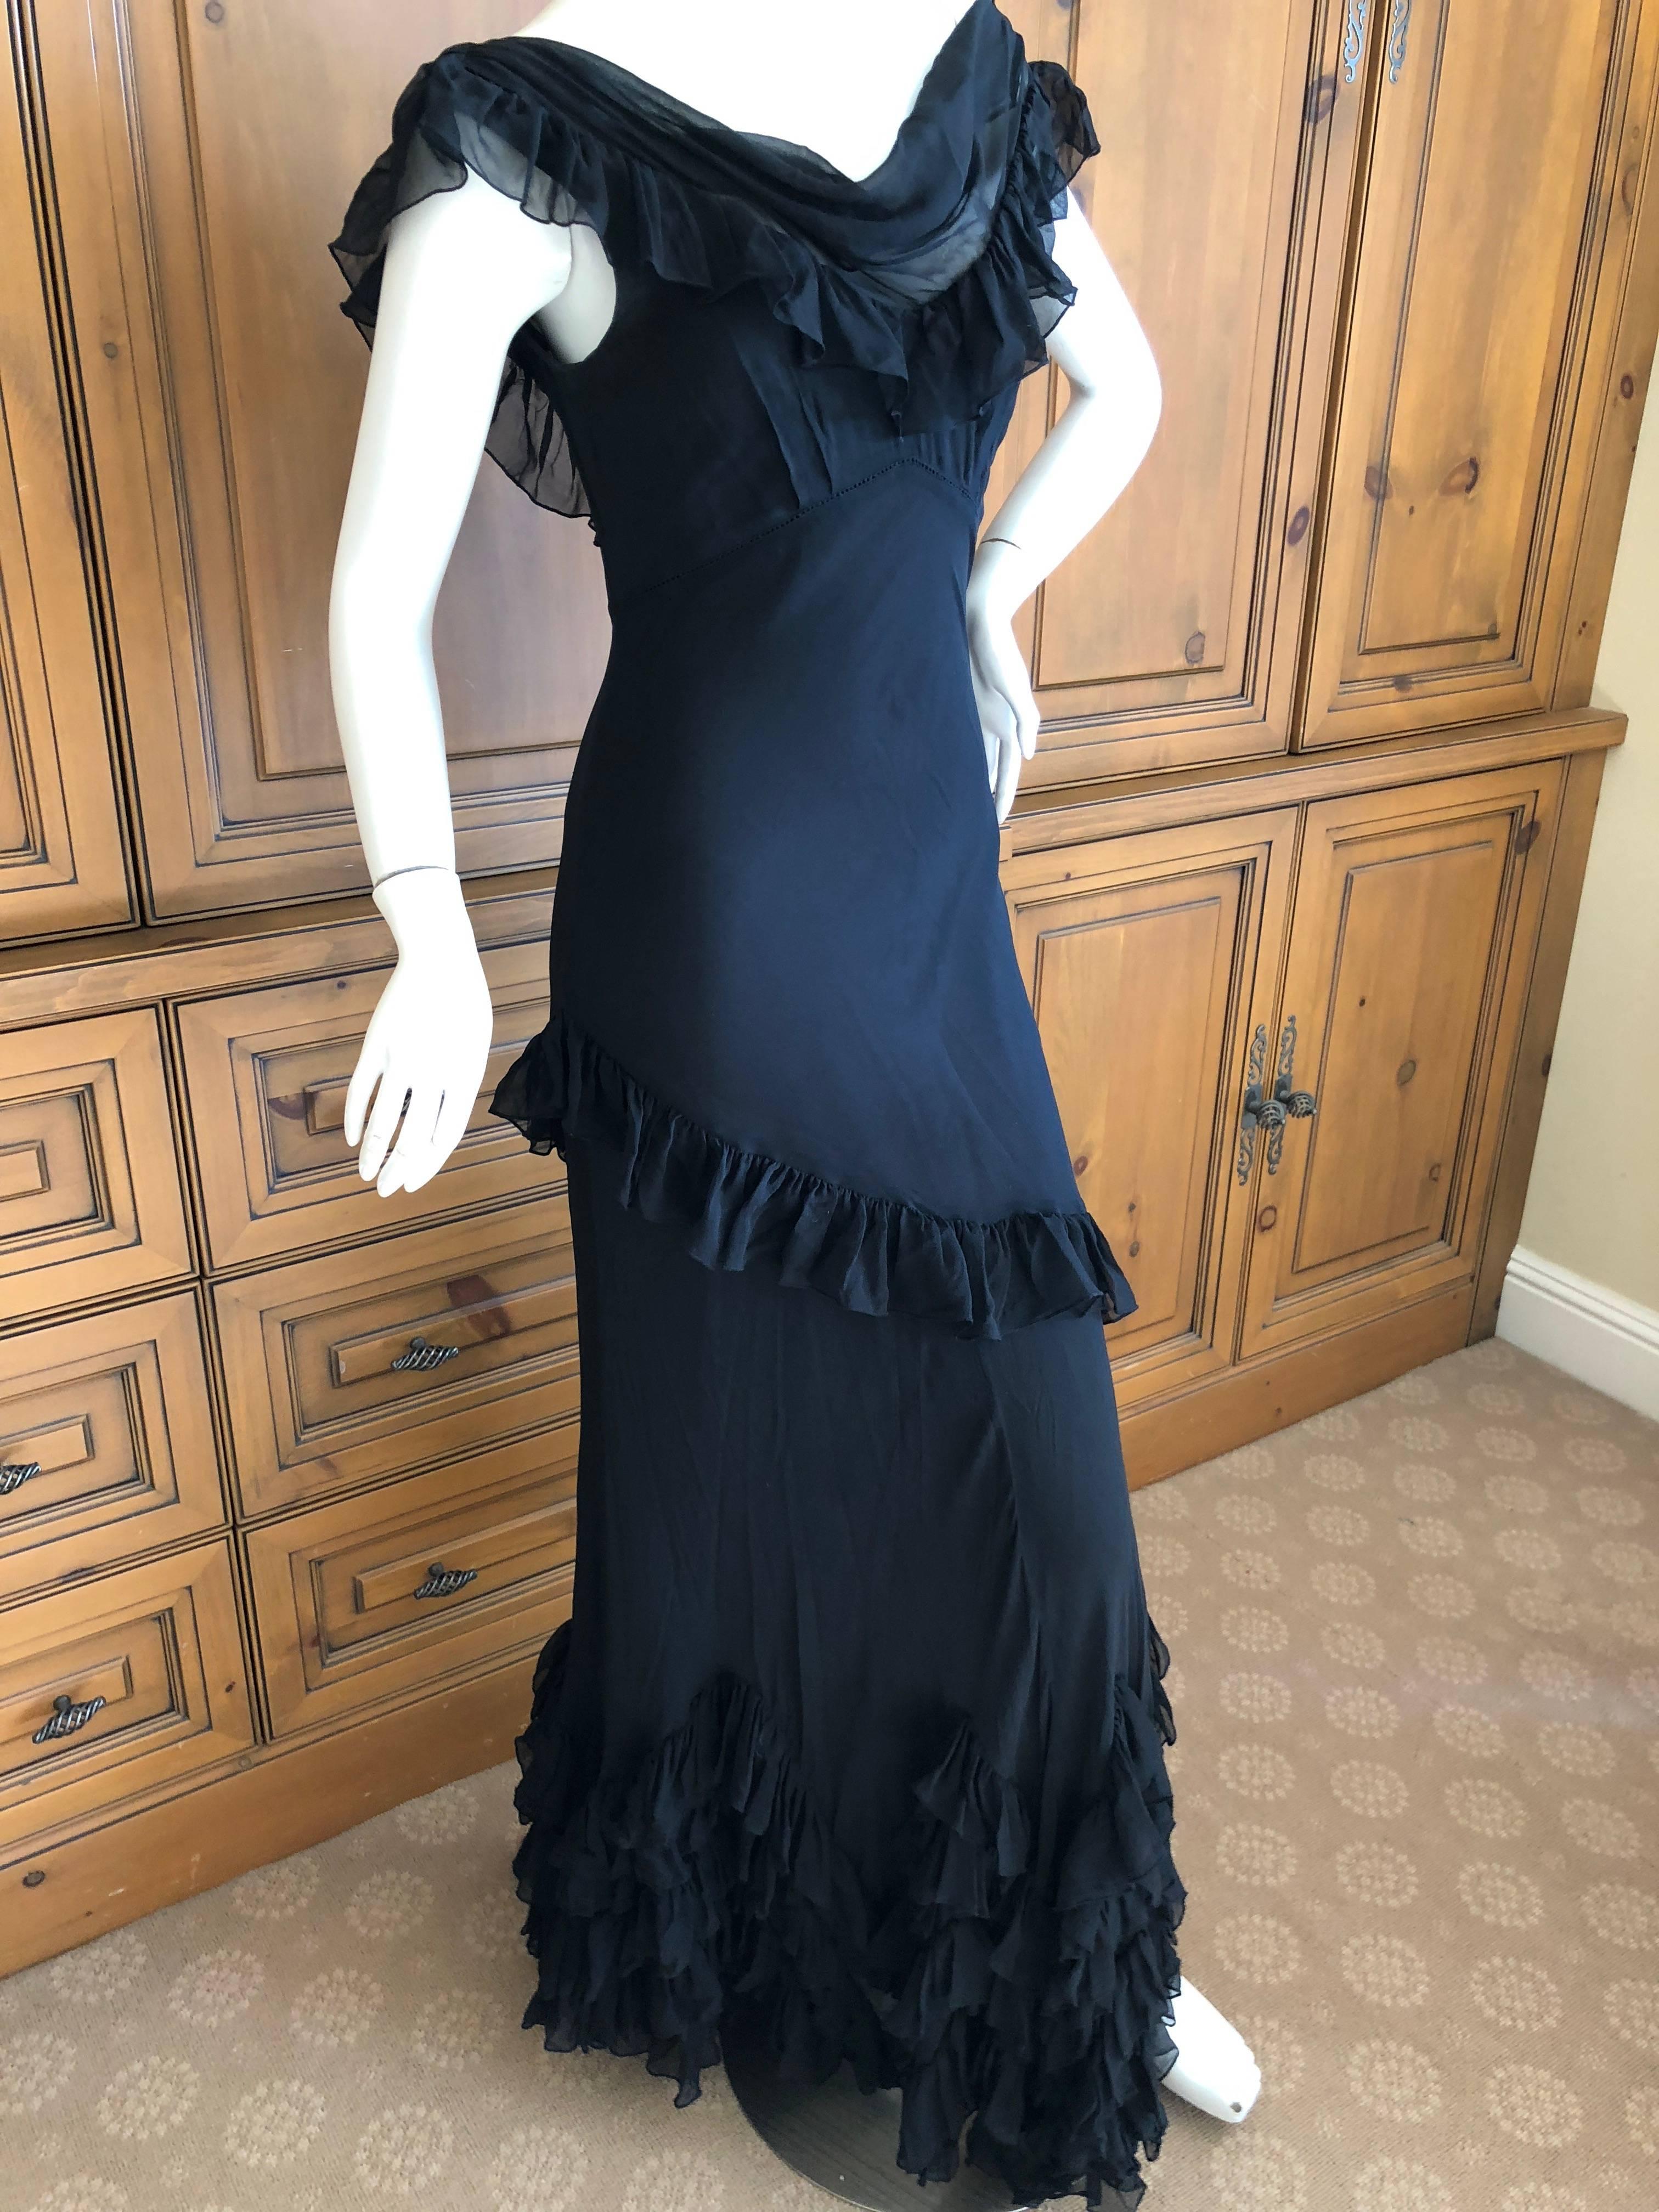  John Galliano Black Sheer Vintage Silk Ruffled Evening Dress with Cowl Back  For Sale 3